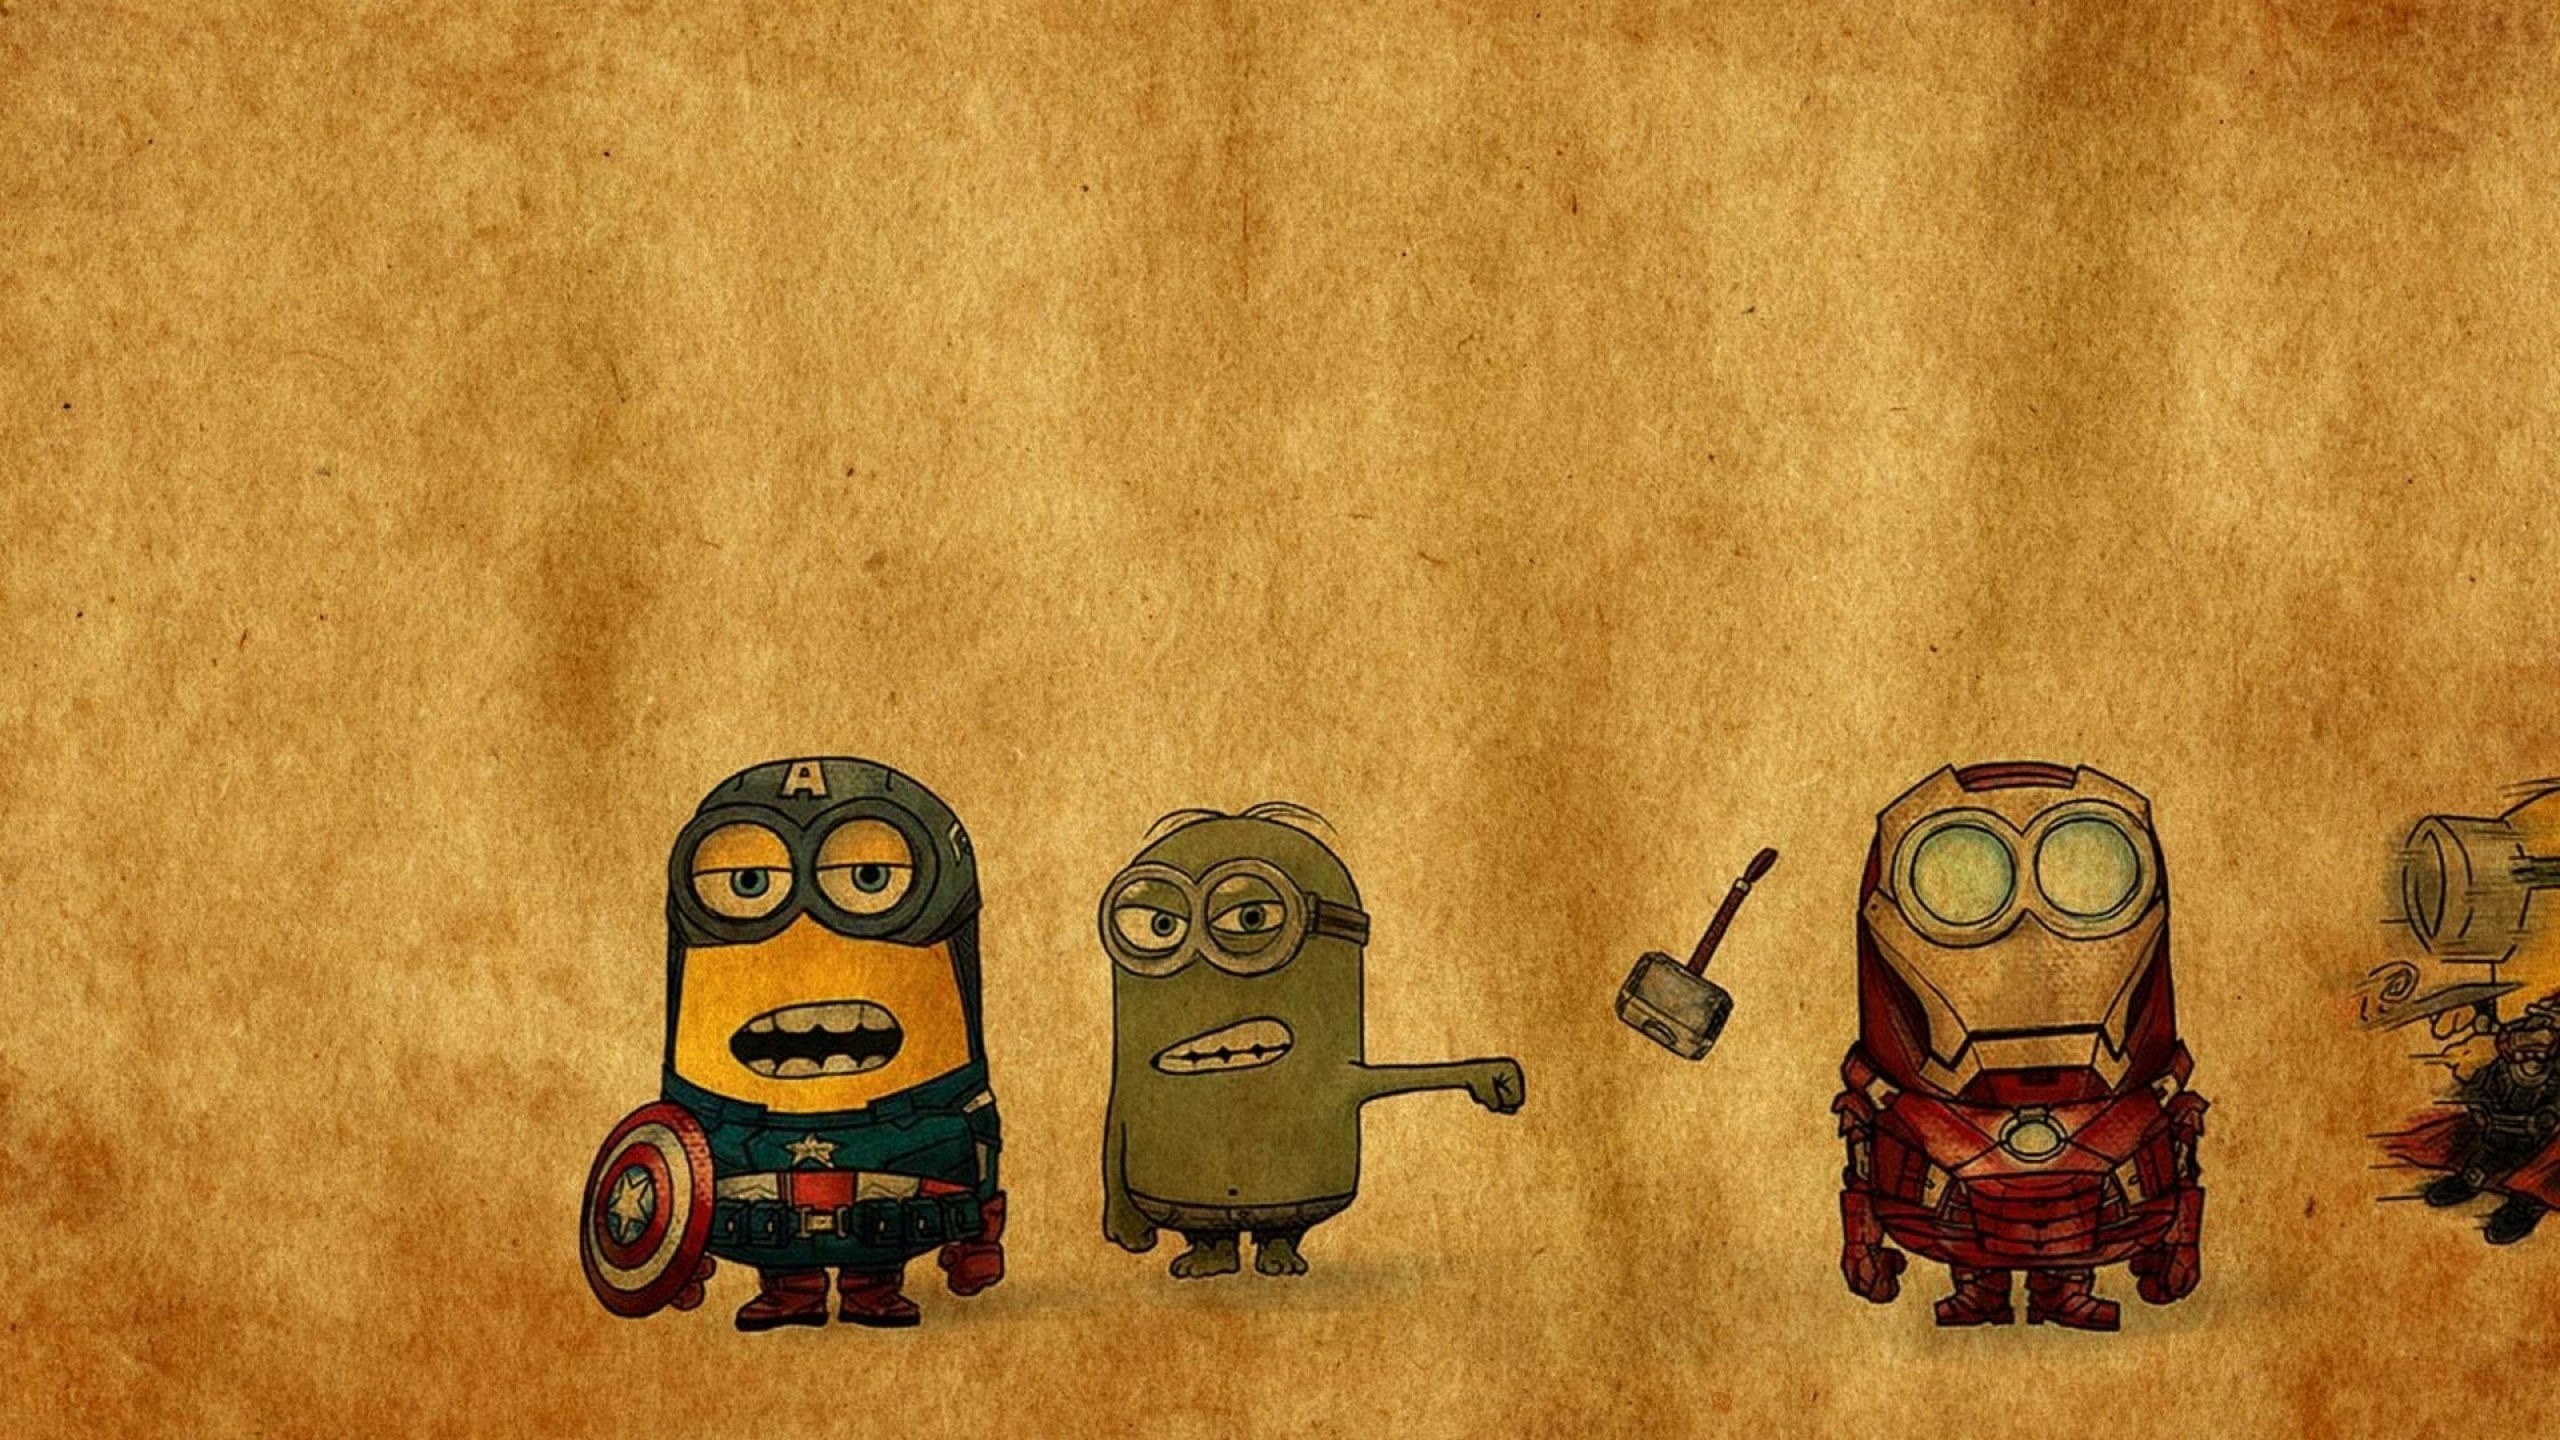 2560x1440 Iron Man Thor funny hammer Despicable Me angry minions crossovers punch  singing Avengers punching Hulk wallpaper